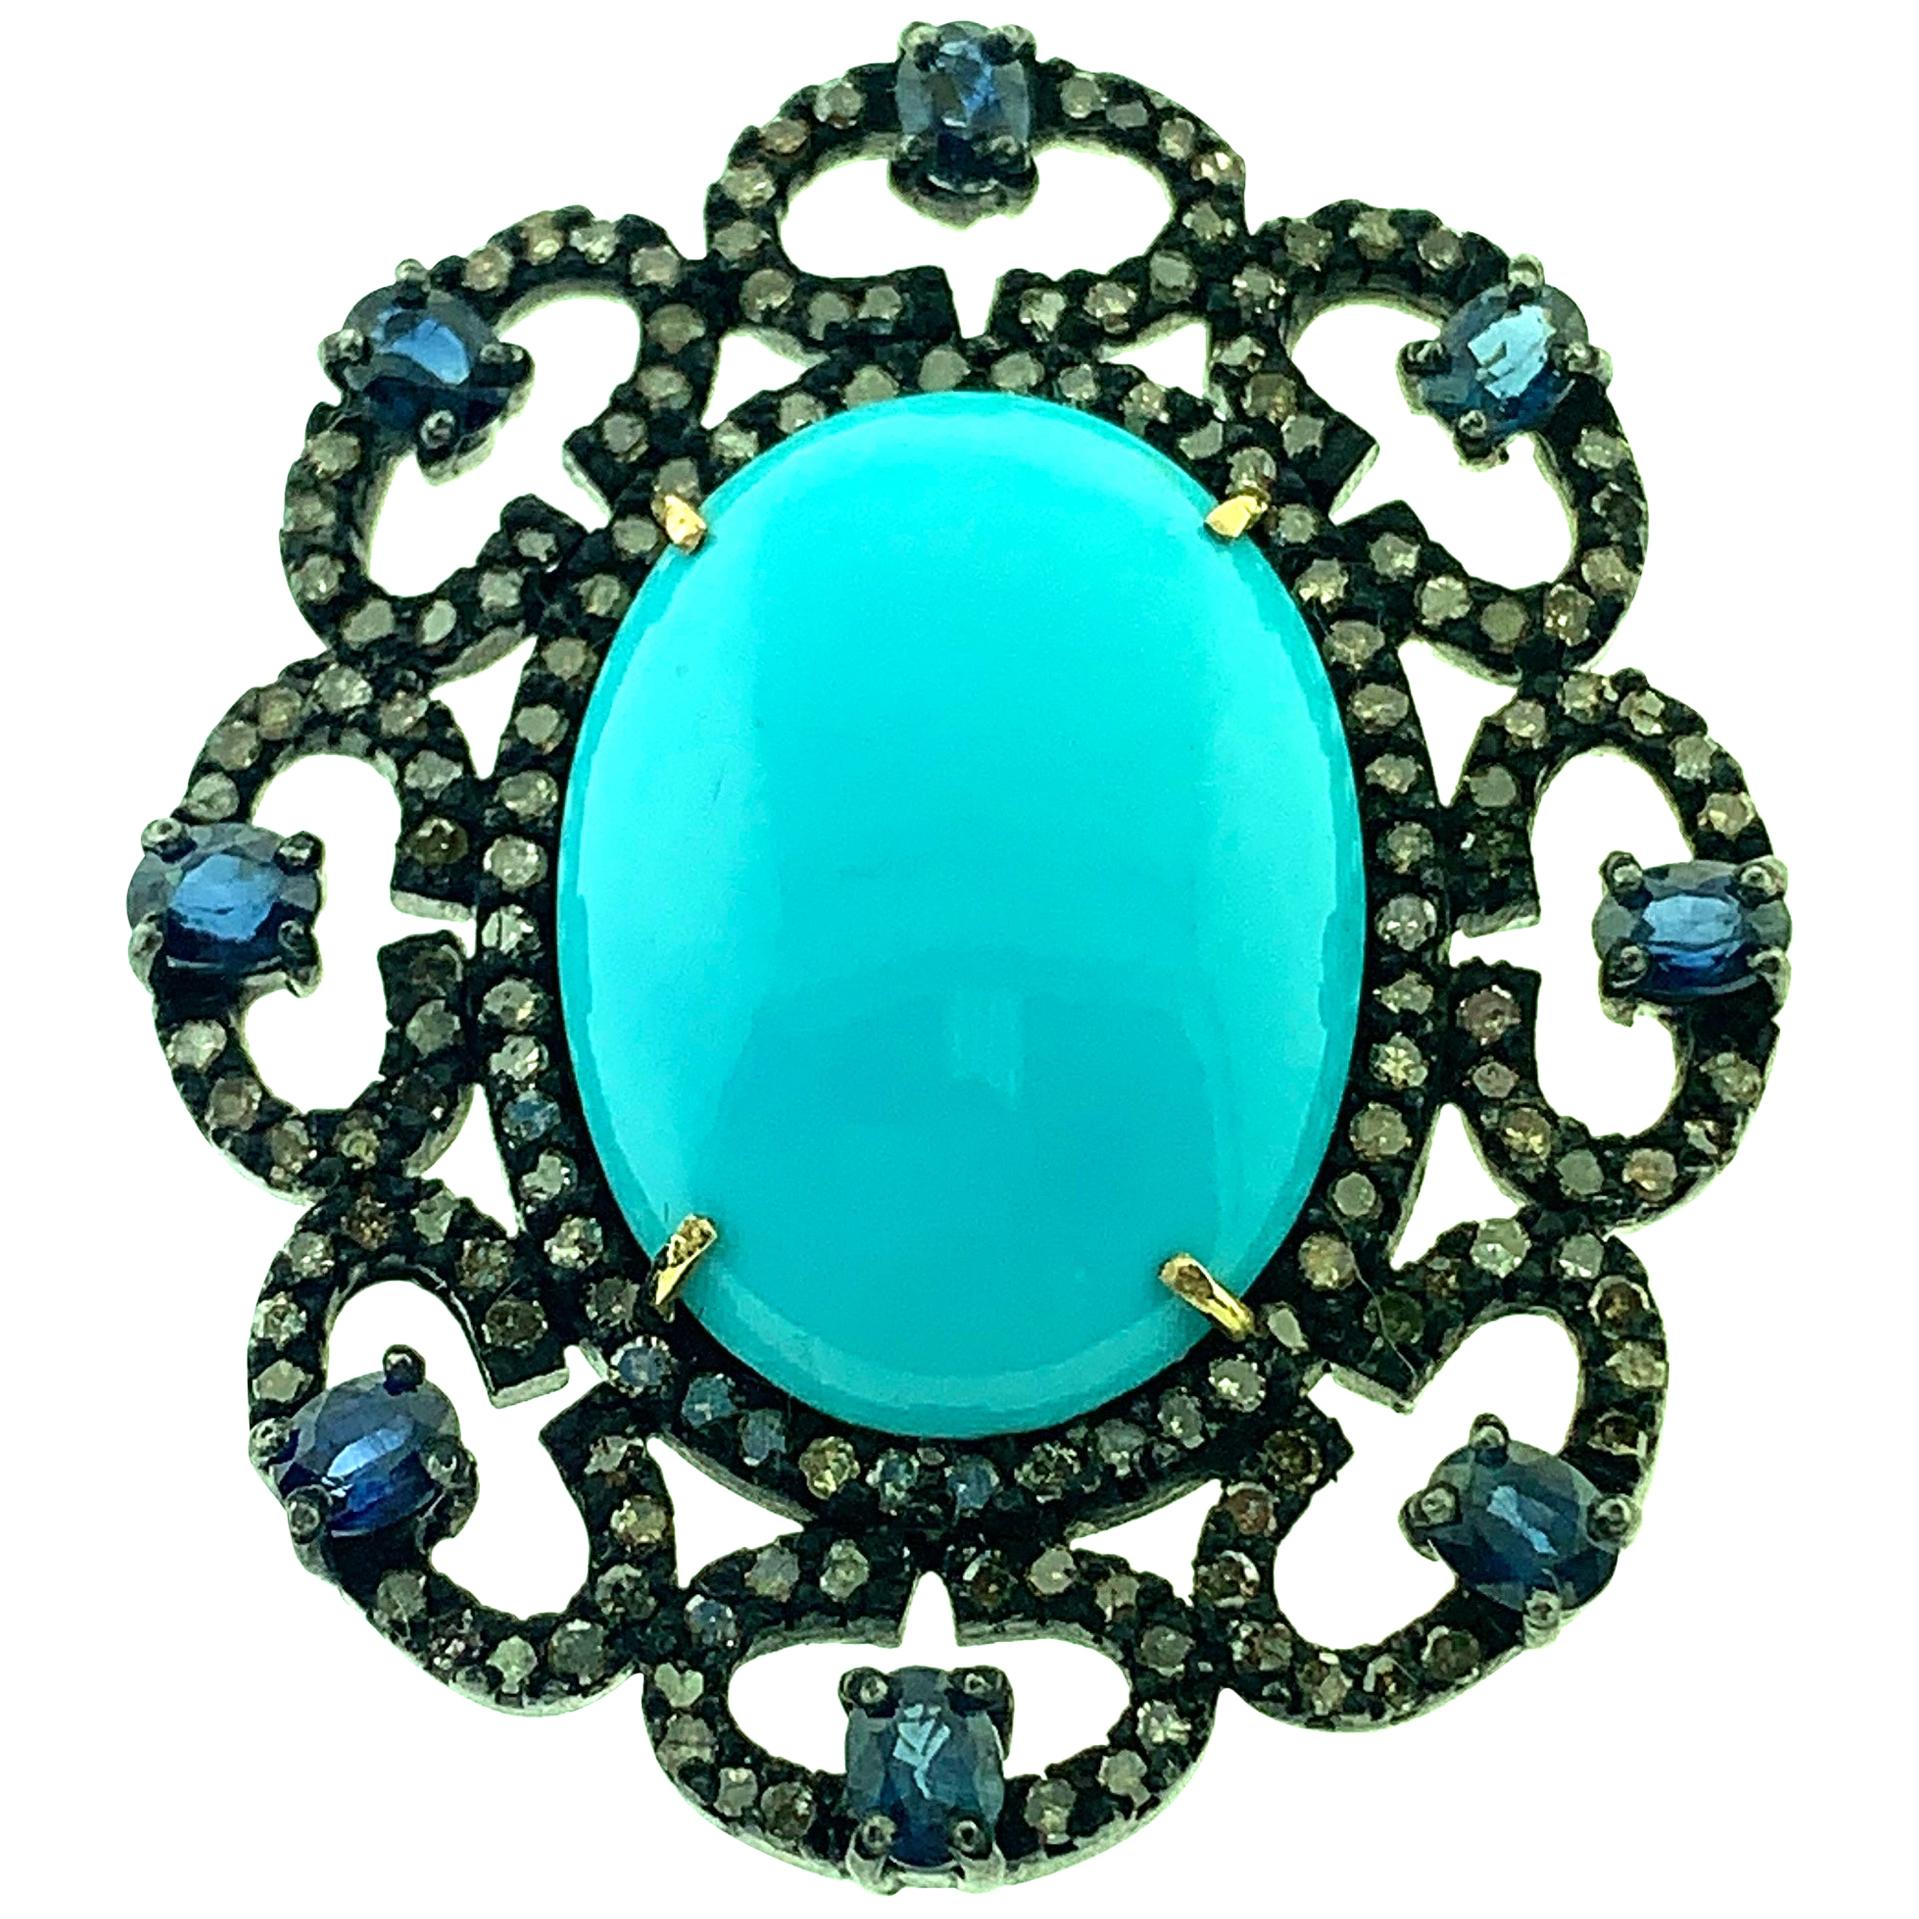 15.86 Carat Turquoise, 2.17Ct Sapphire and Pave Diamond Ring Silver, 14Kt Gold For Sale